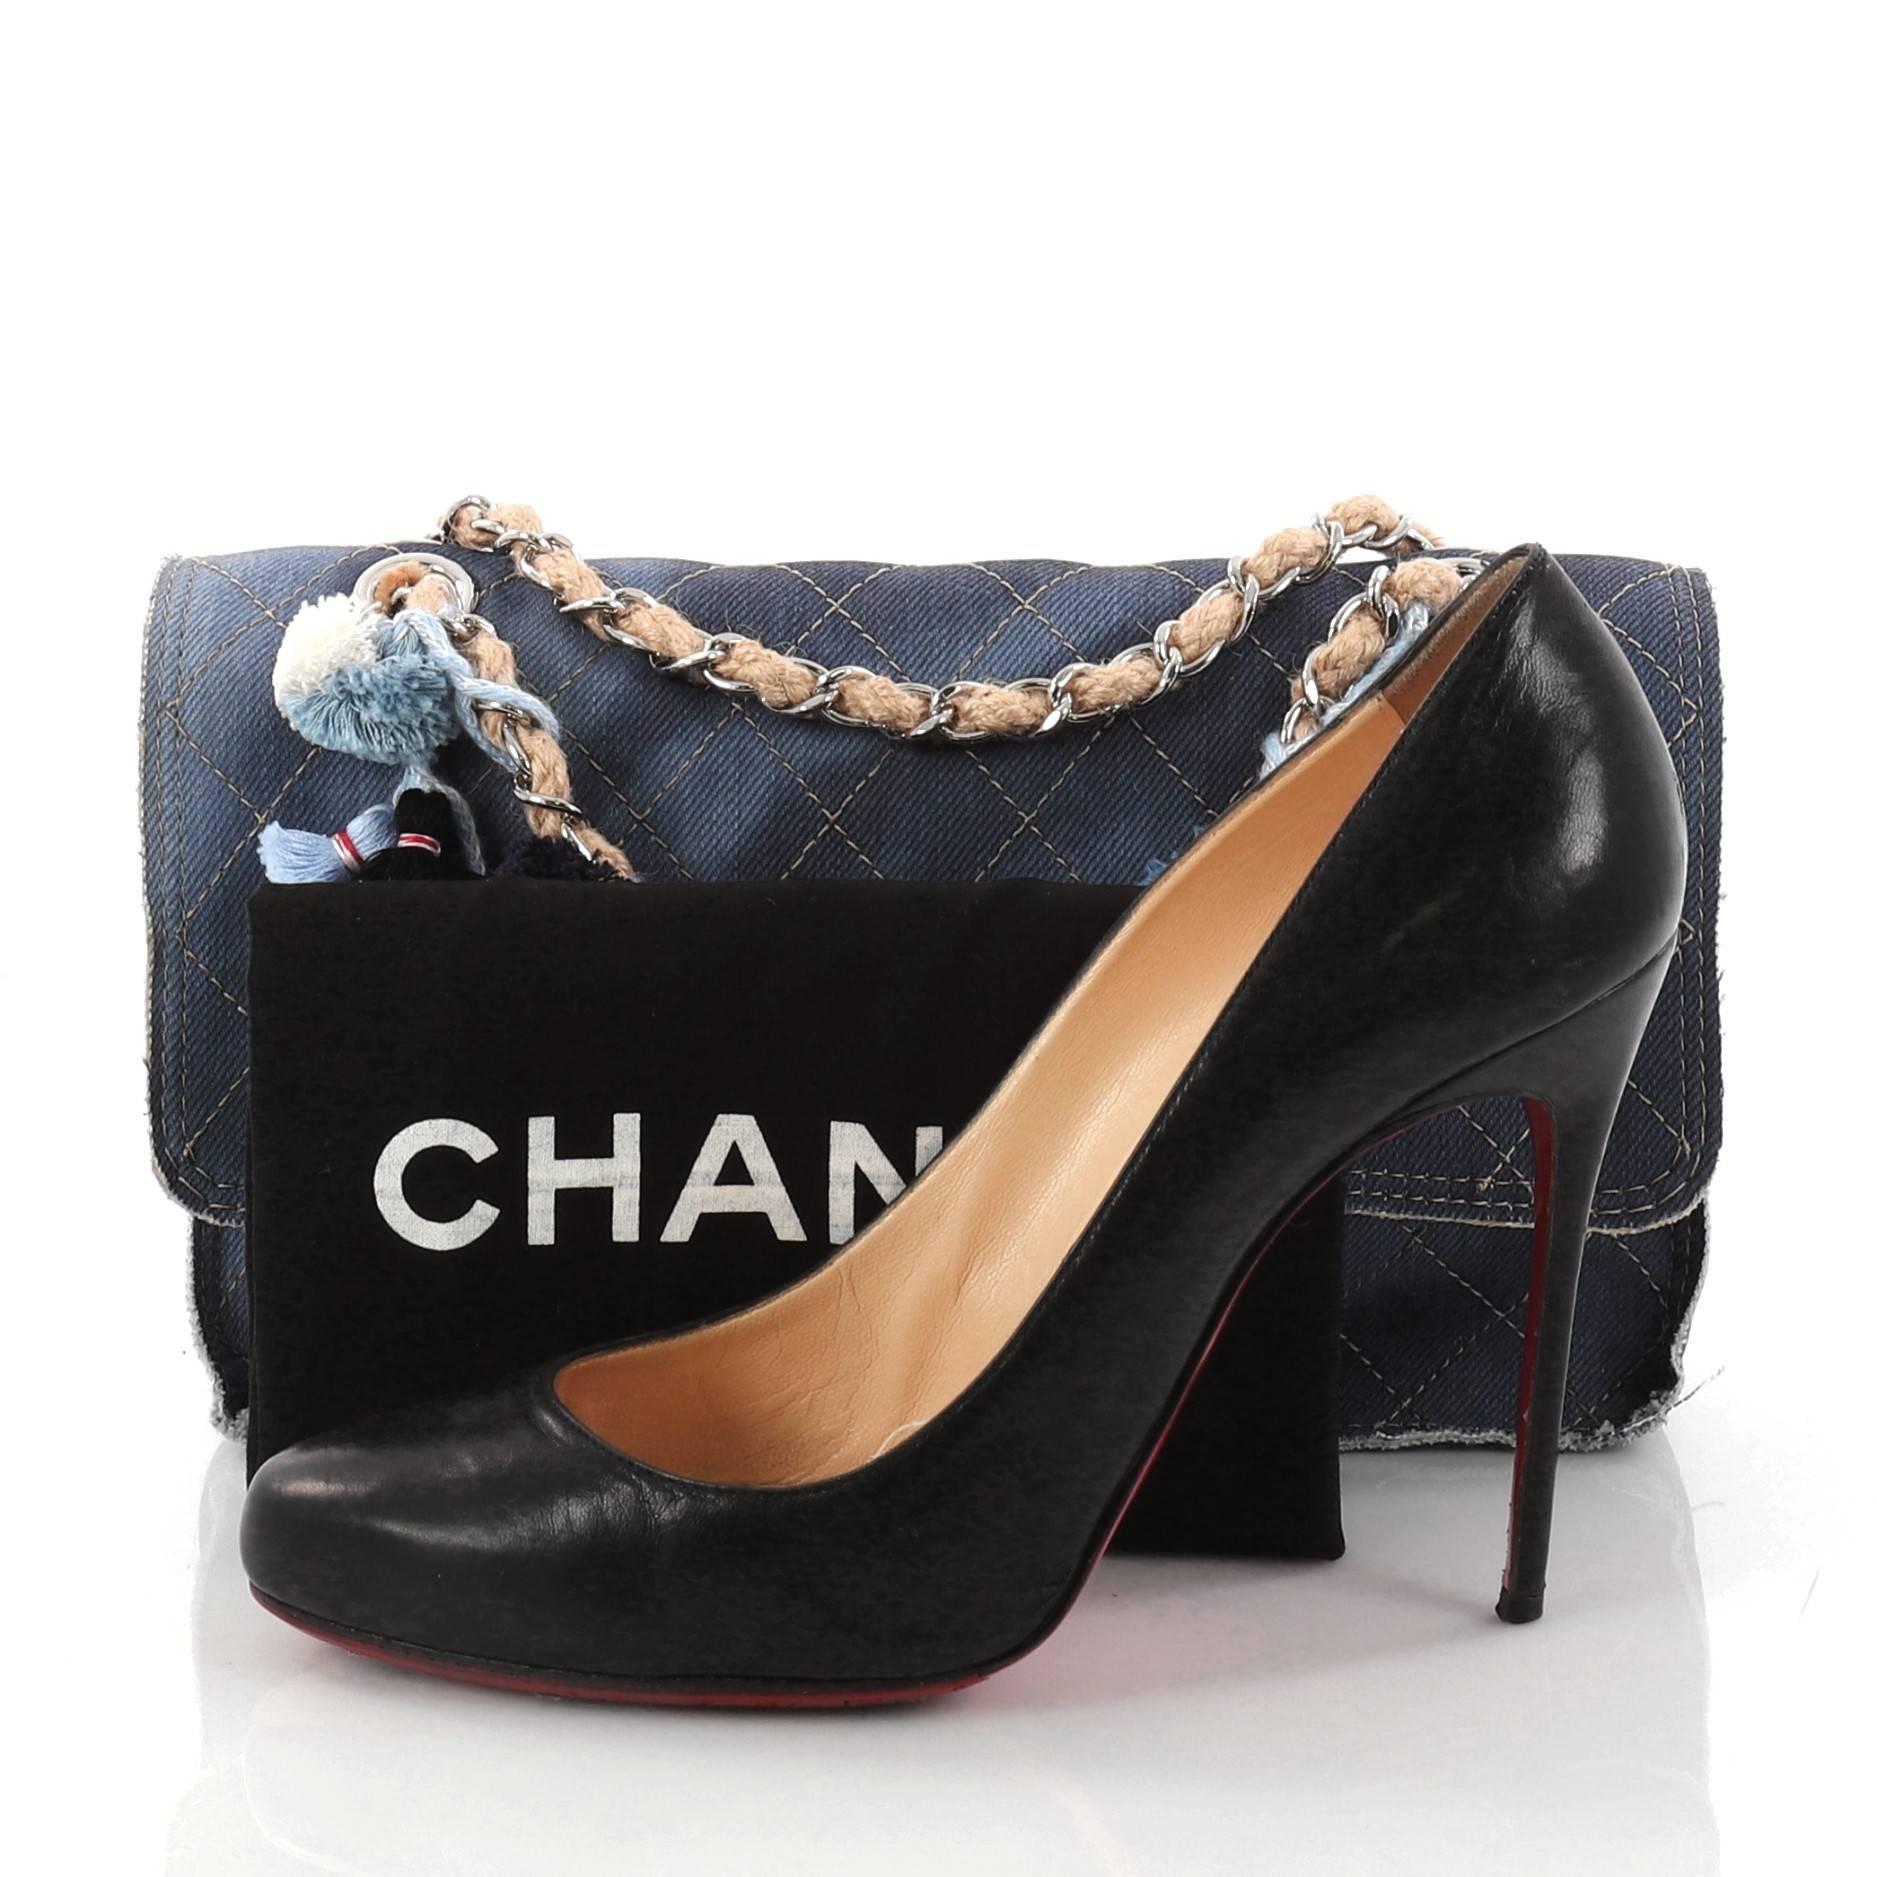 This authentic Chanel Limited Edition Pom Pom Flap Bag Printed Denim Jumbo presented in the brand's 2015 Dubai Cruise Collection showcases the brand's most impeccable, avant-garde design made for Chanel lovers. Crafted in quilted blue printed denim,